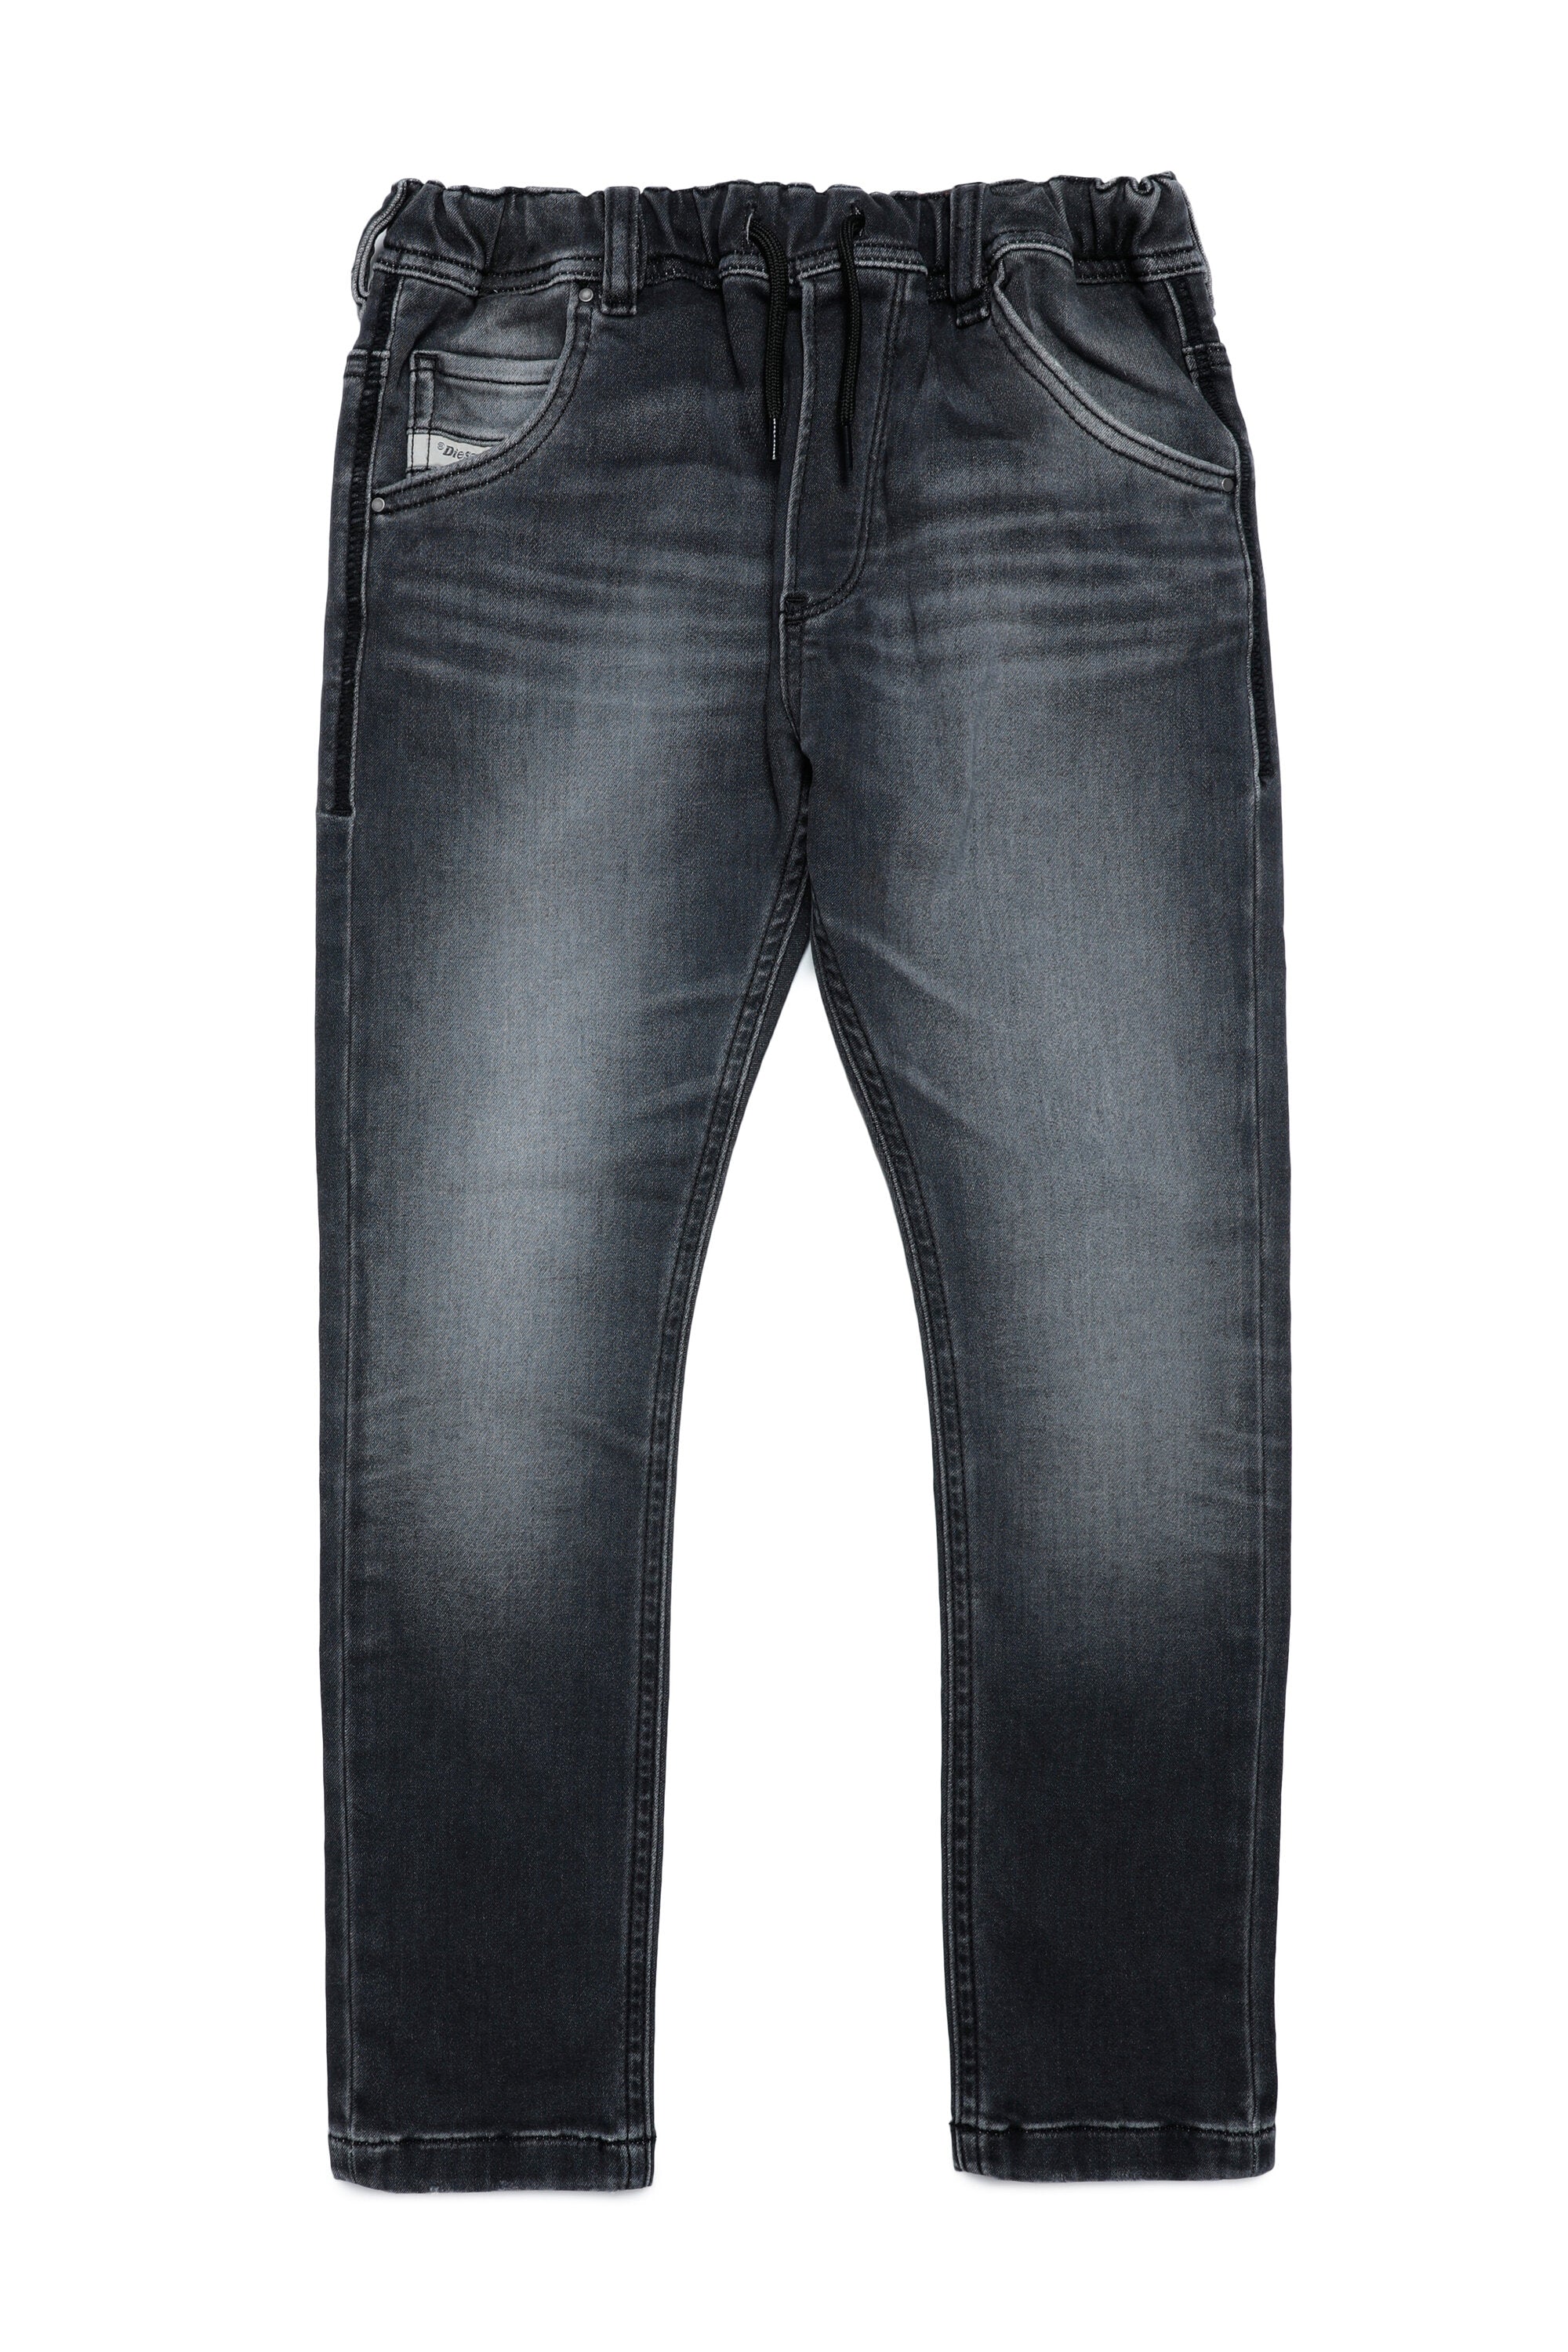 JoggJeans® Krooley corte tapered negros con matices